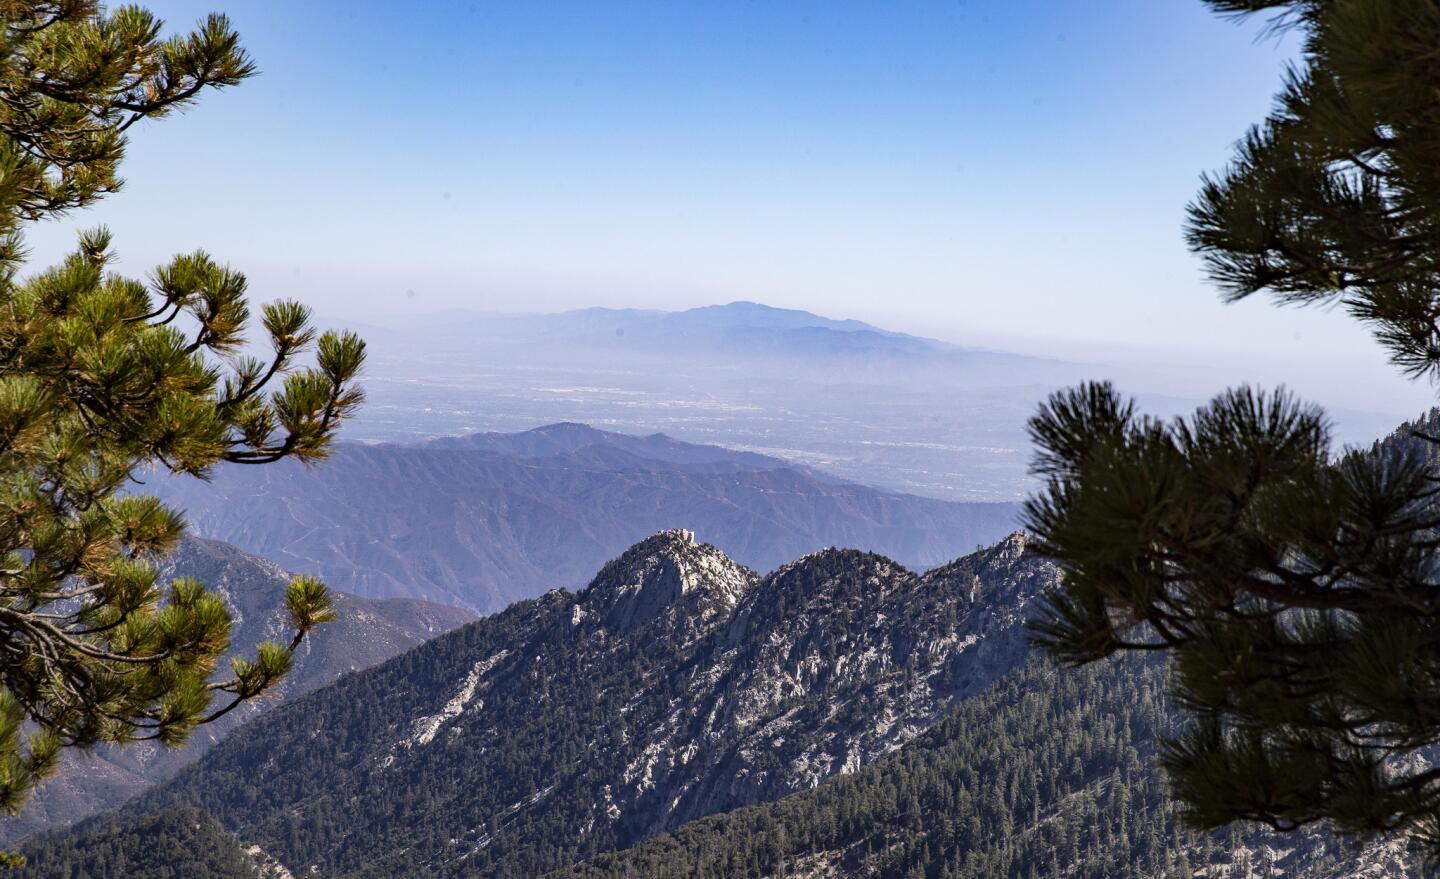 Angeles Crest Highway is one of Southern California’s best motoring roads, with high elevations and huge vistas.